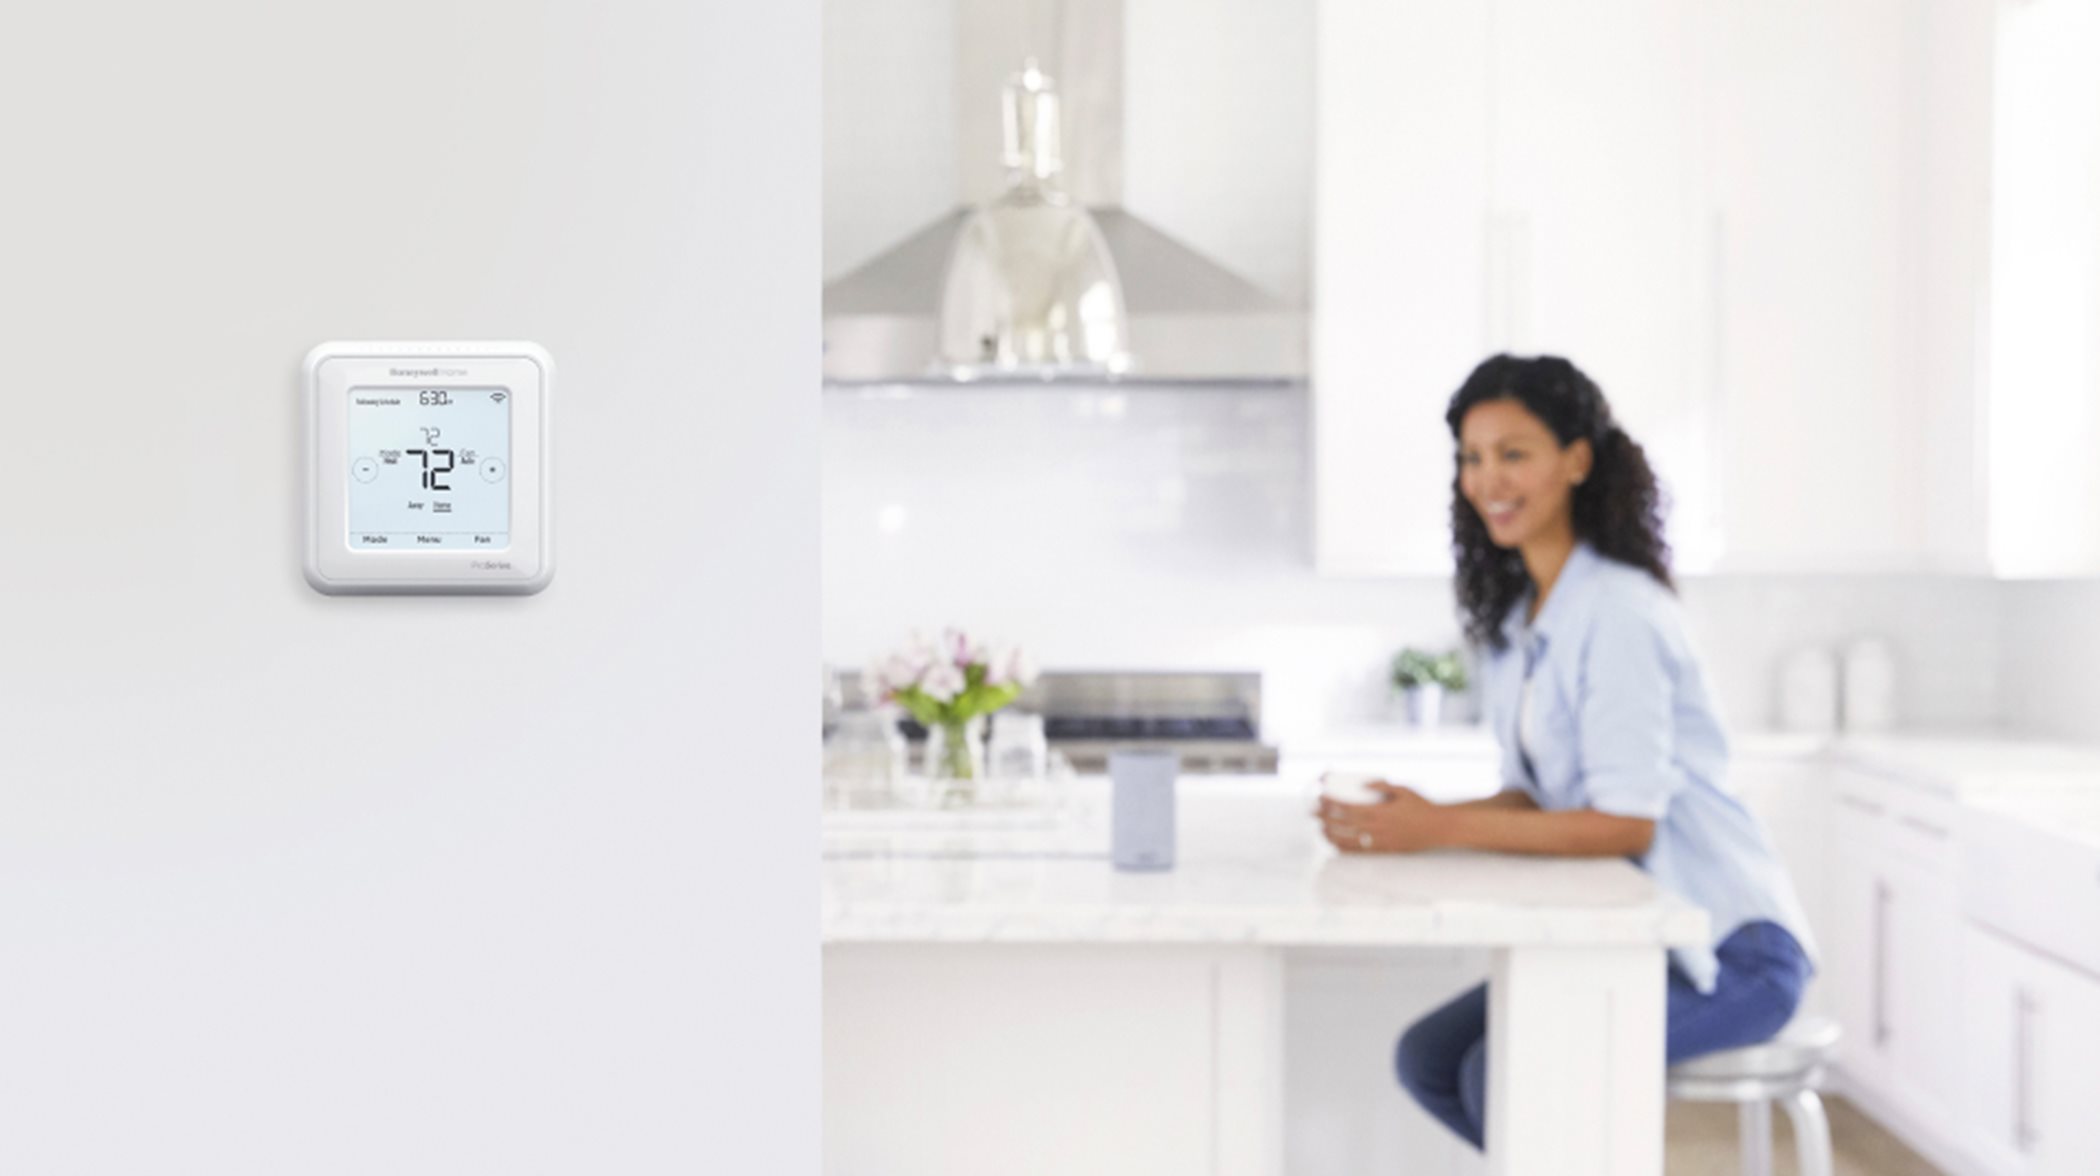 Honey well Smart Thermostat